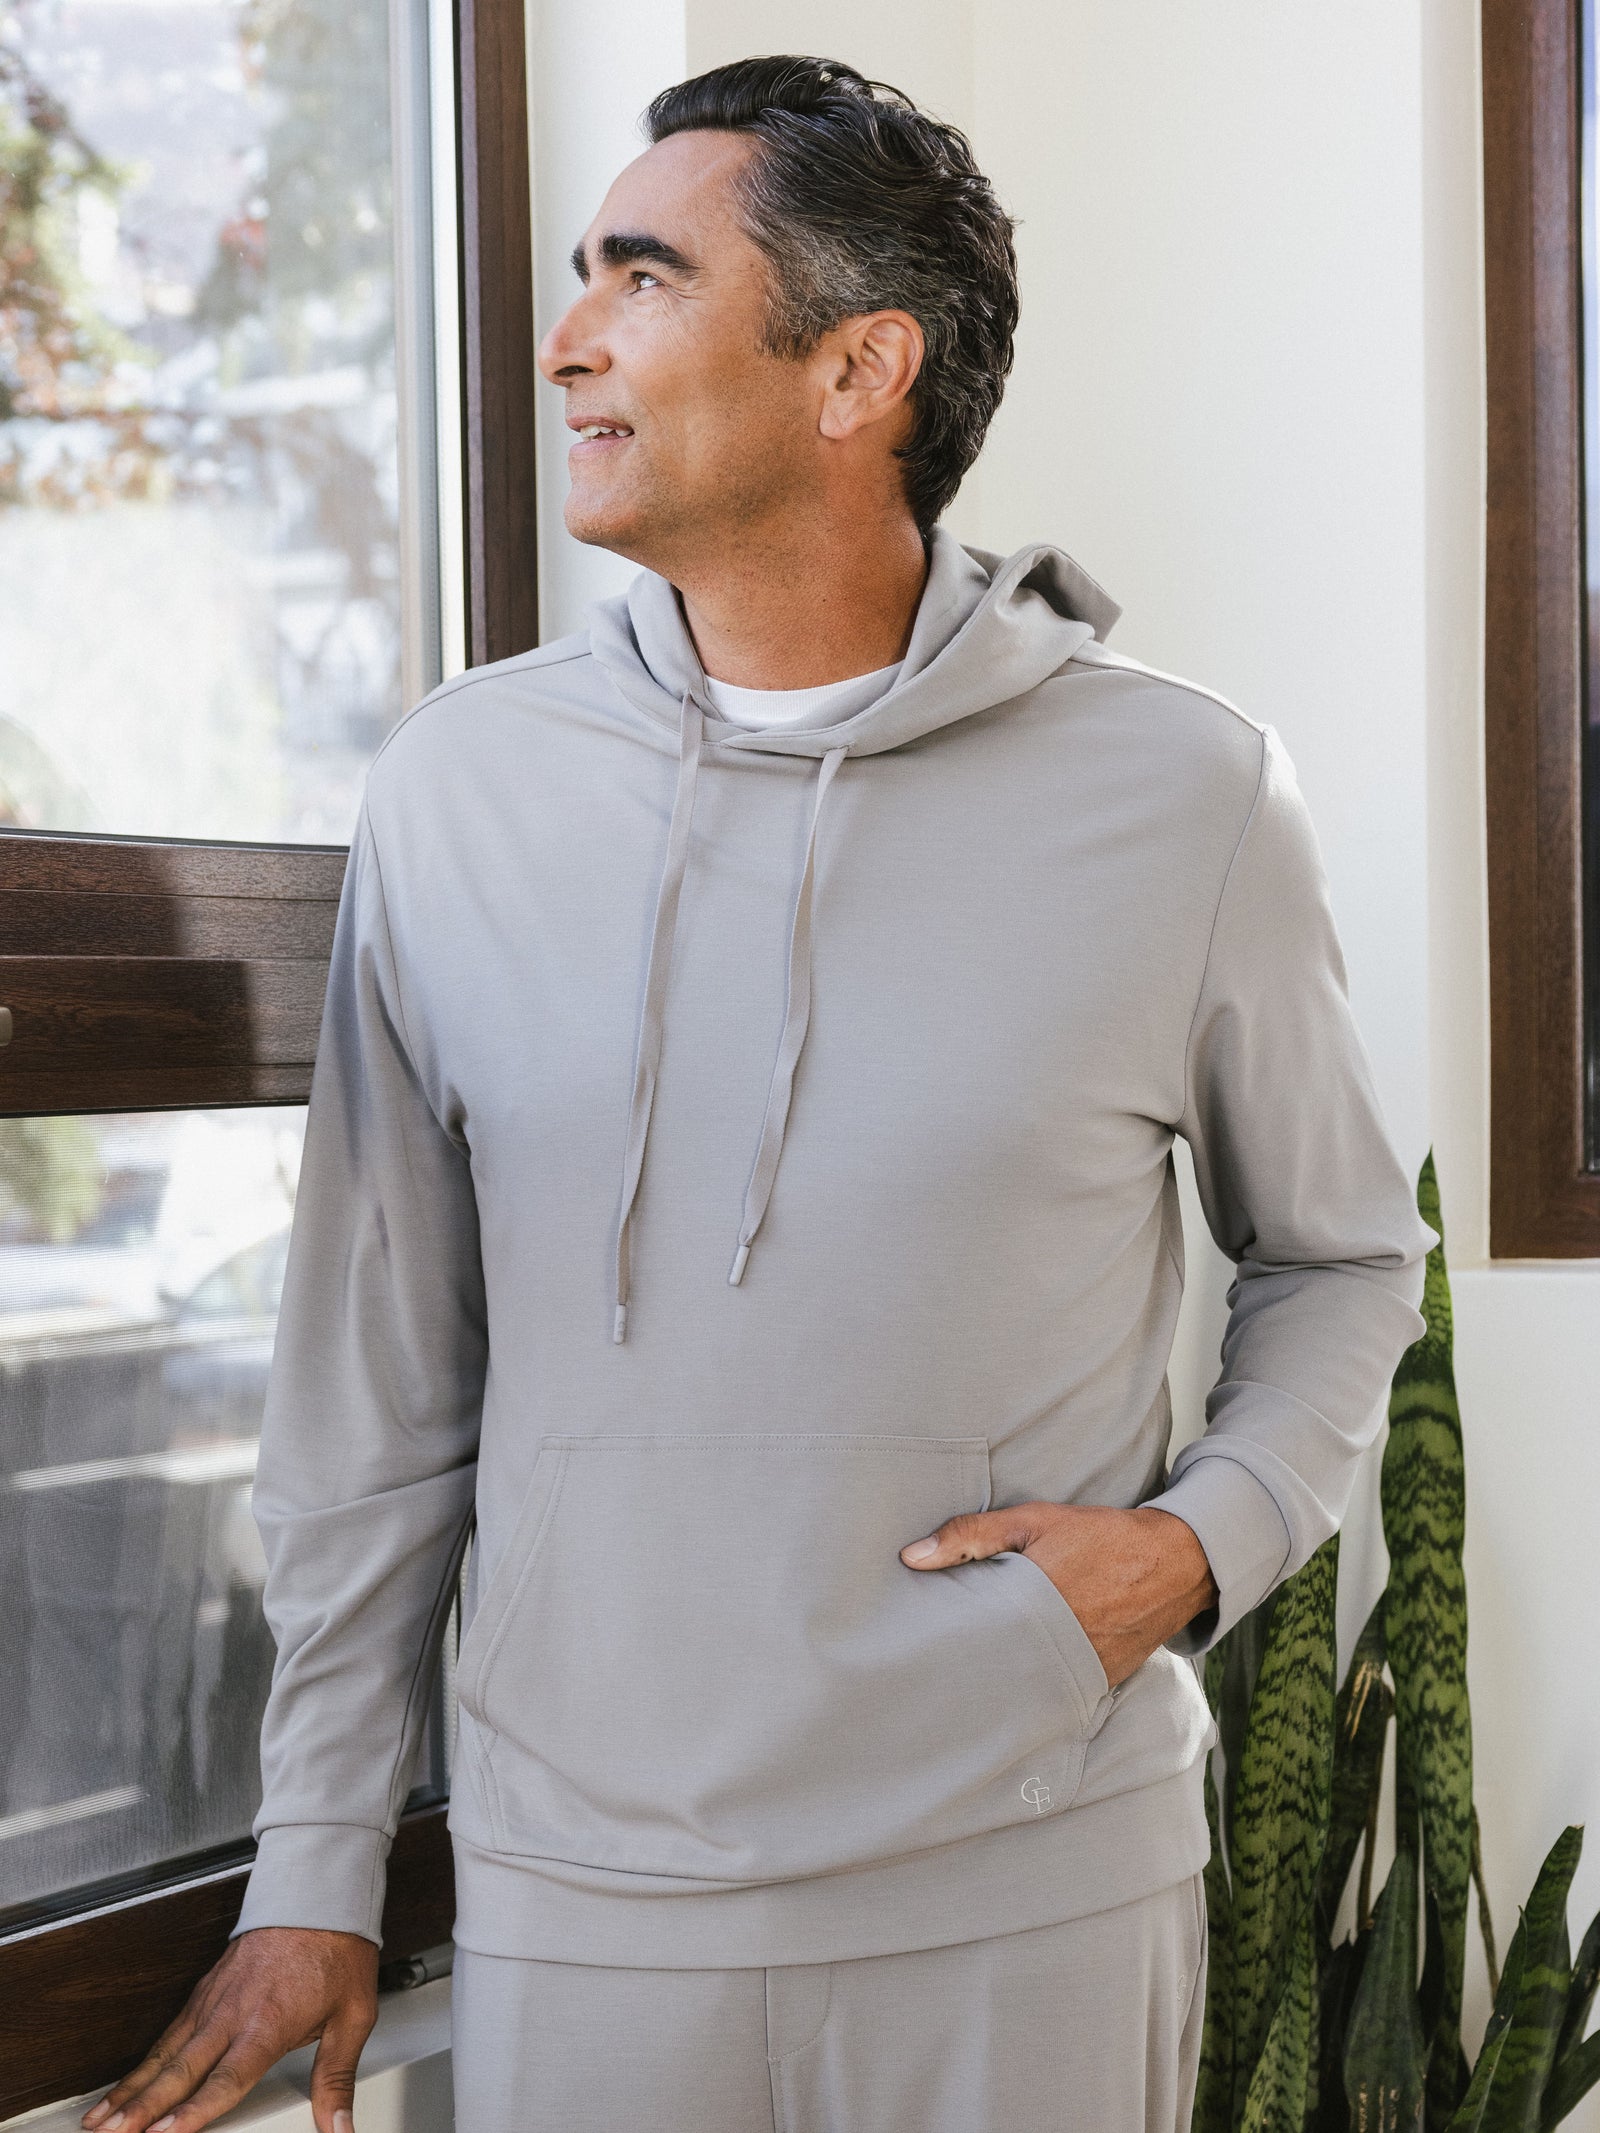 Stone Bamboo Hoodie worn by man standing in front of a window in a house.